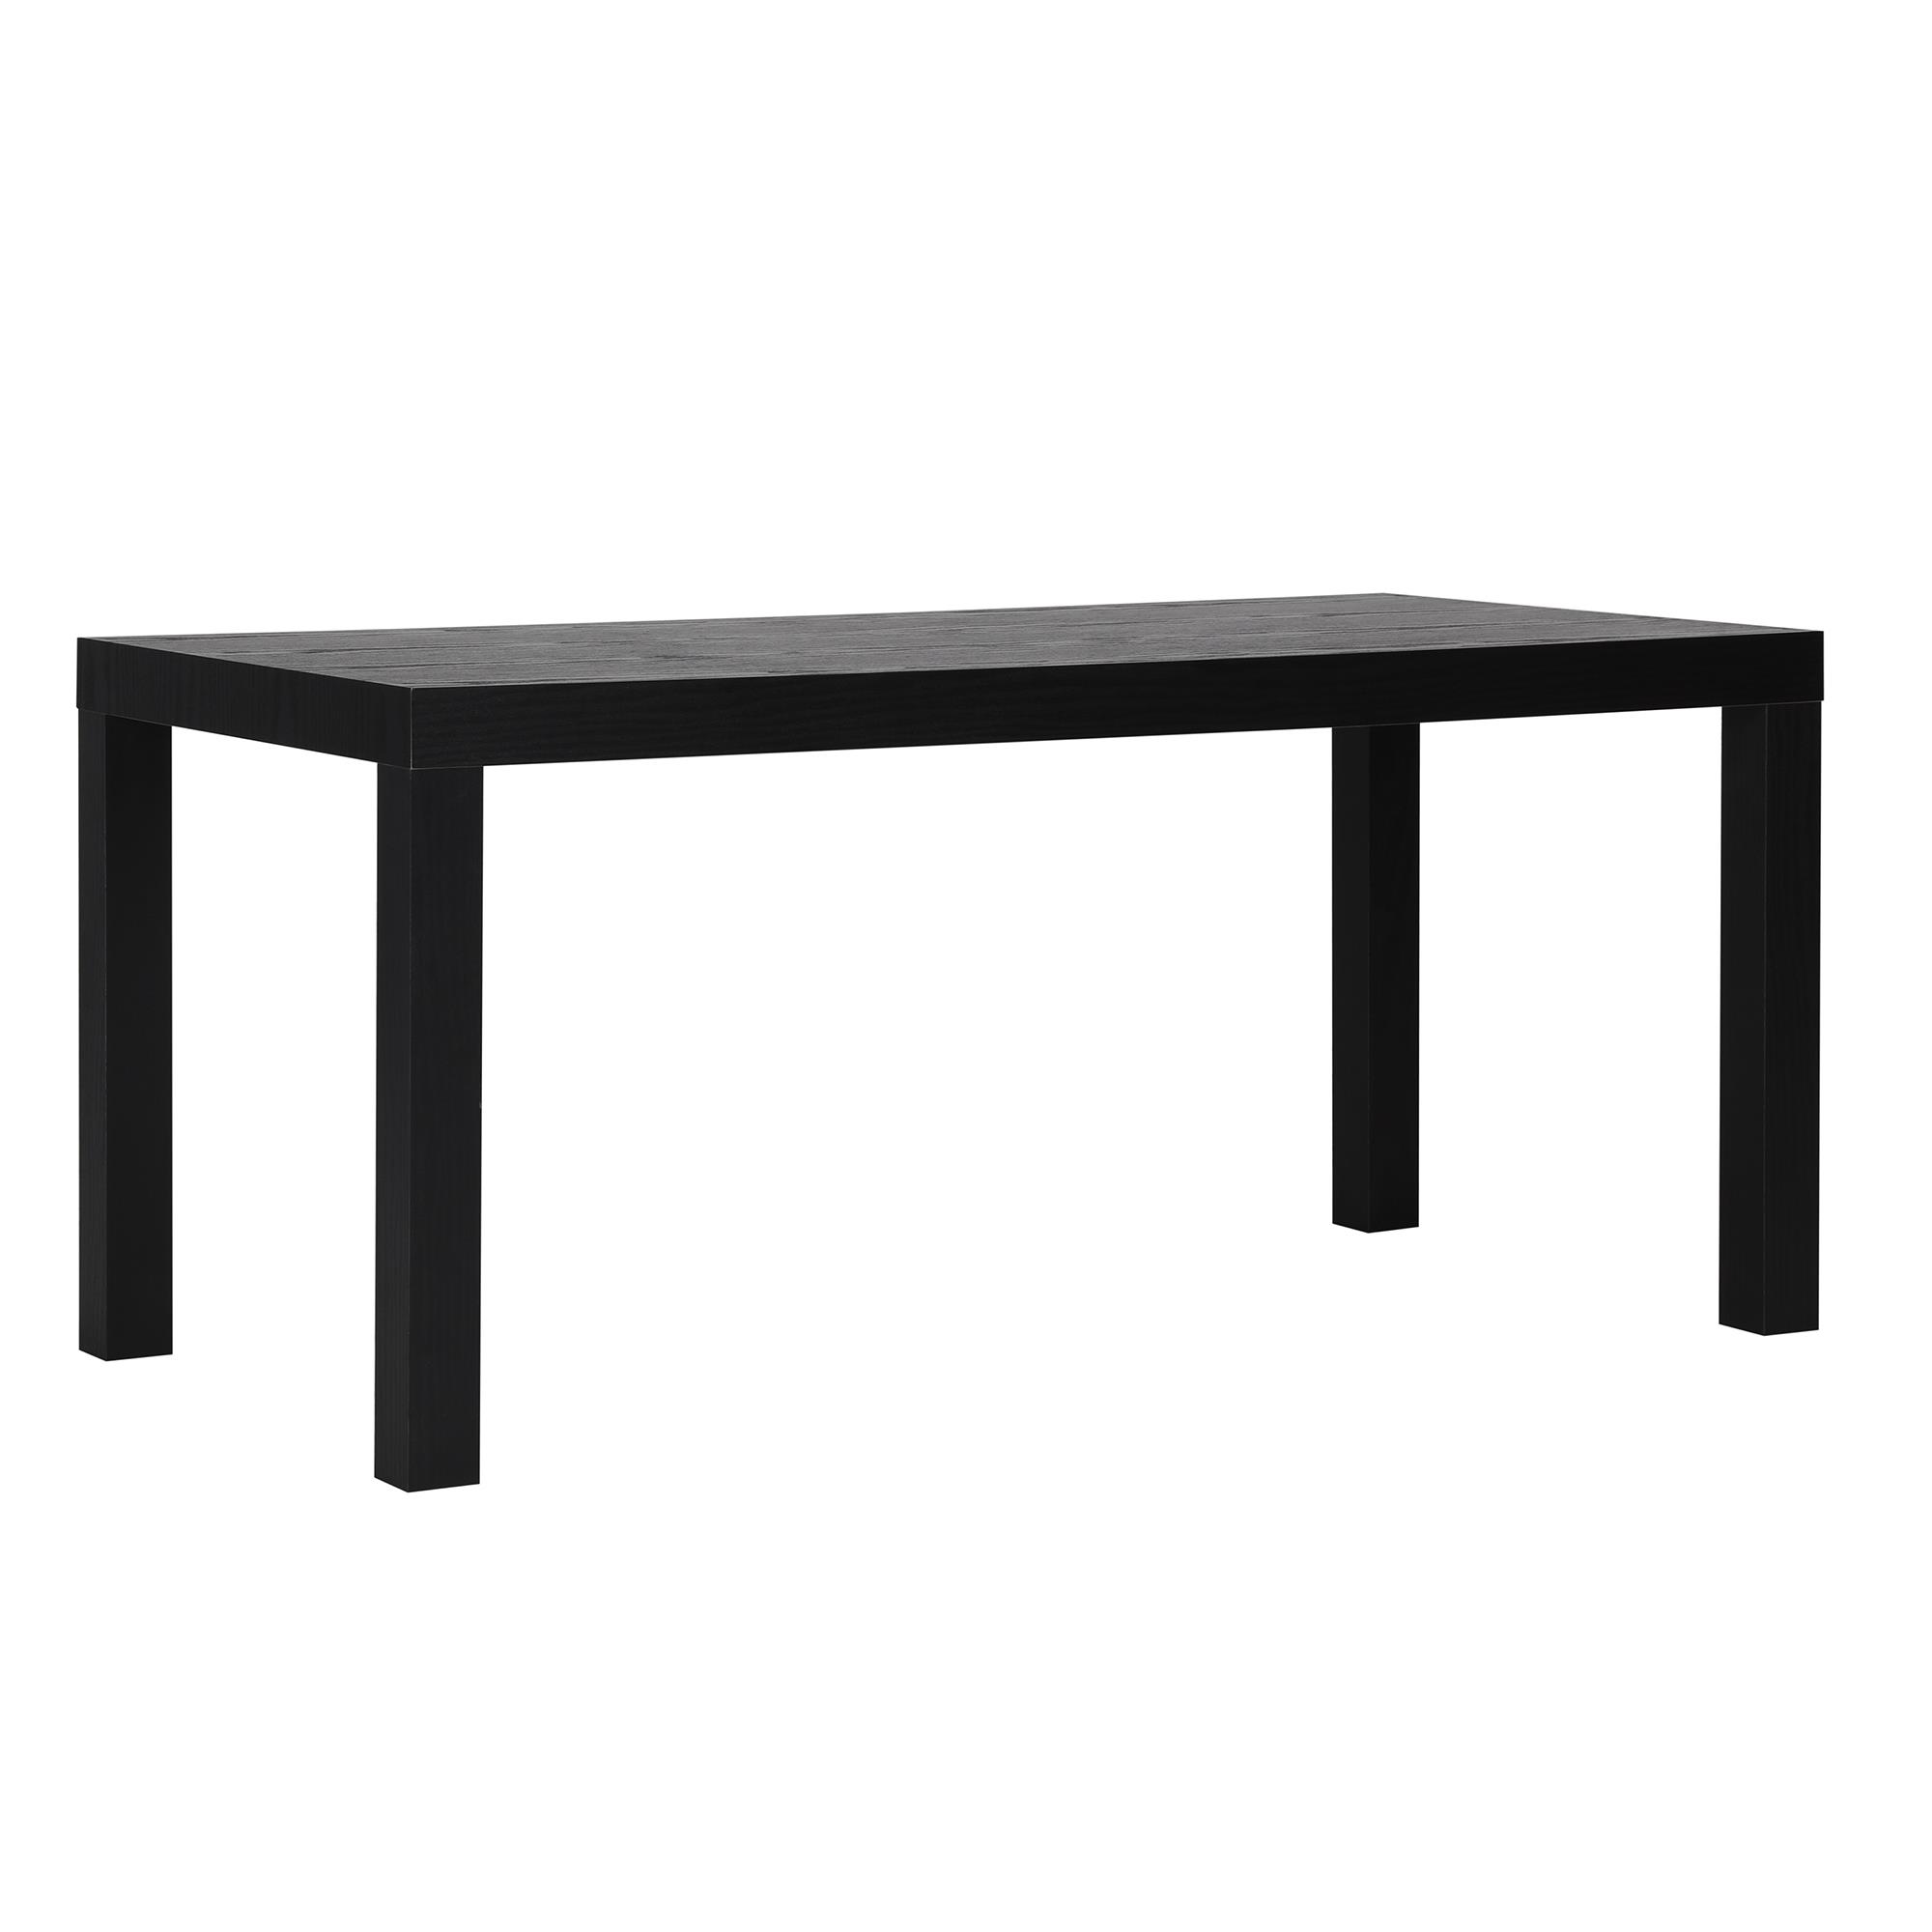 Mainstays Parsons Coffee Table, Black - image 2 of 6